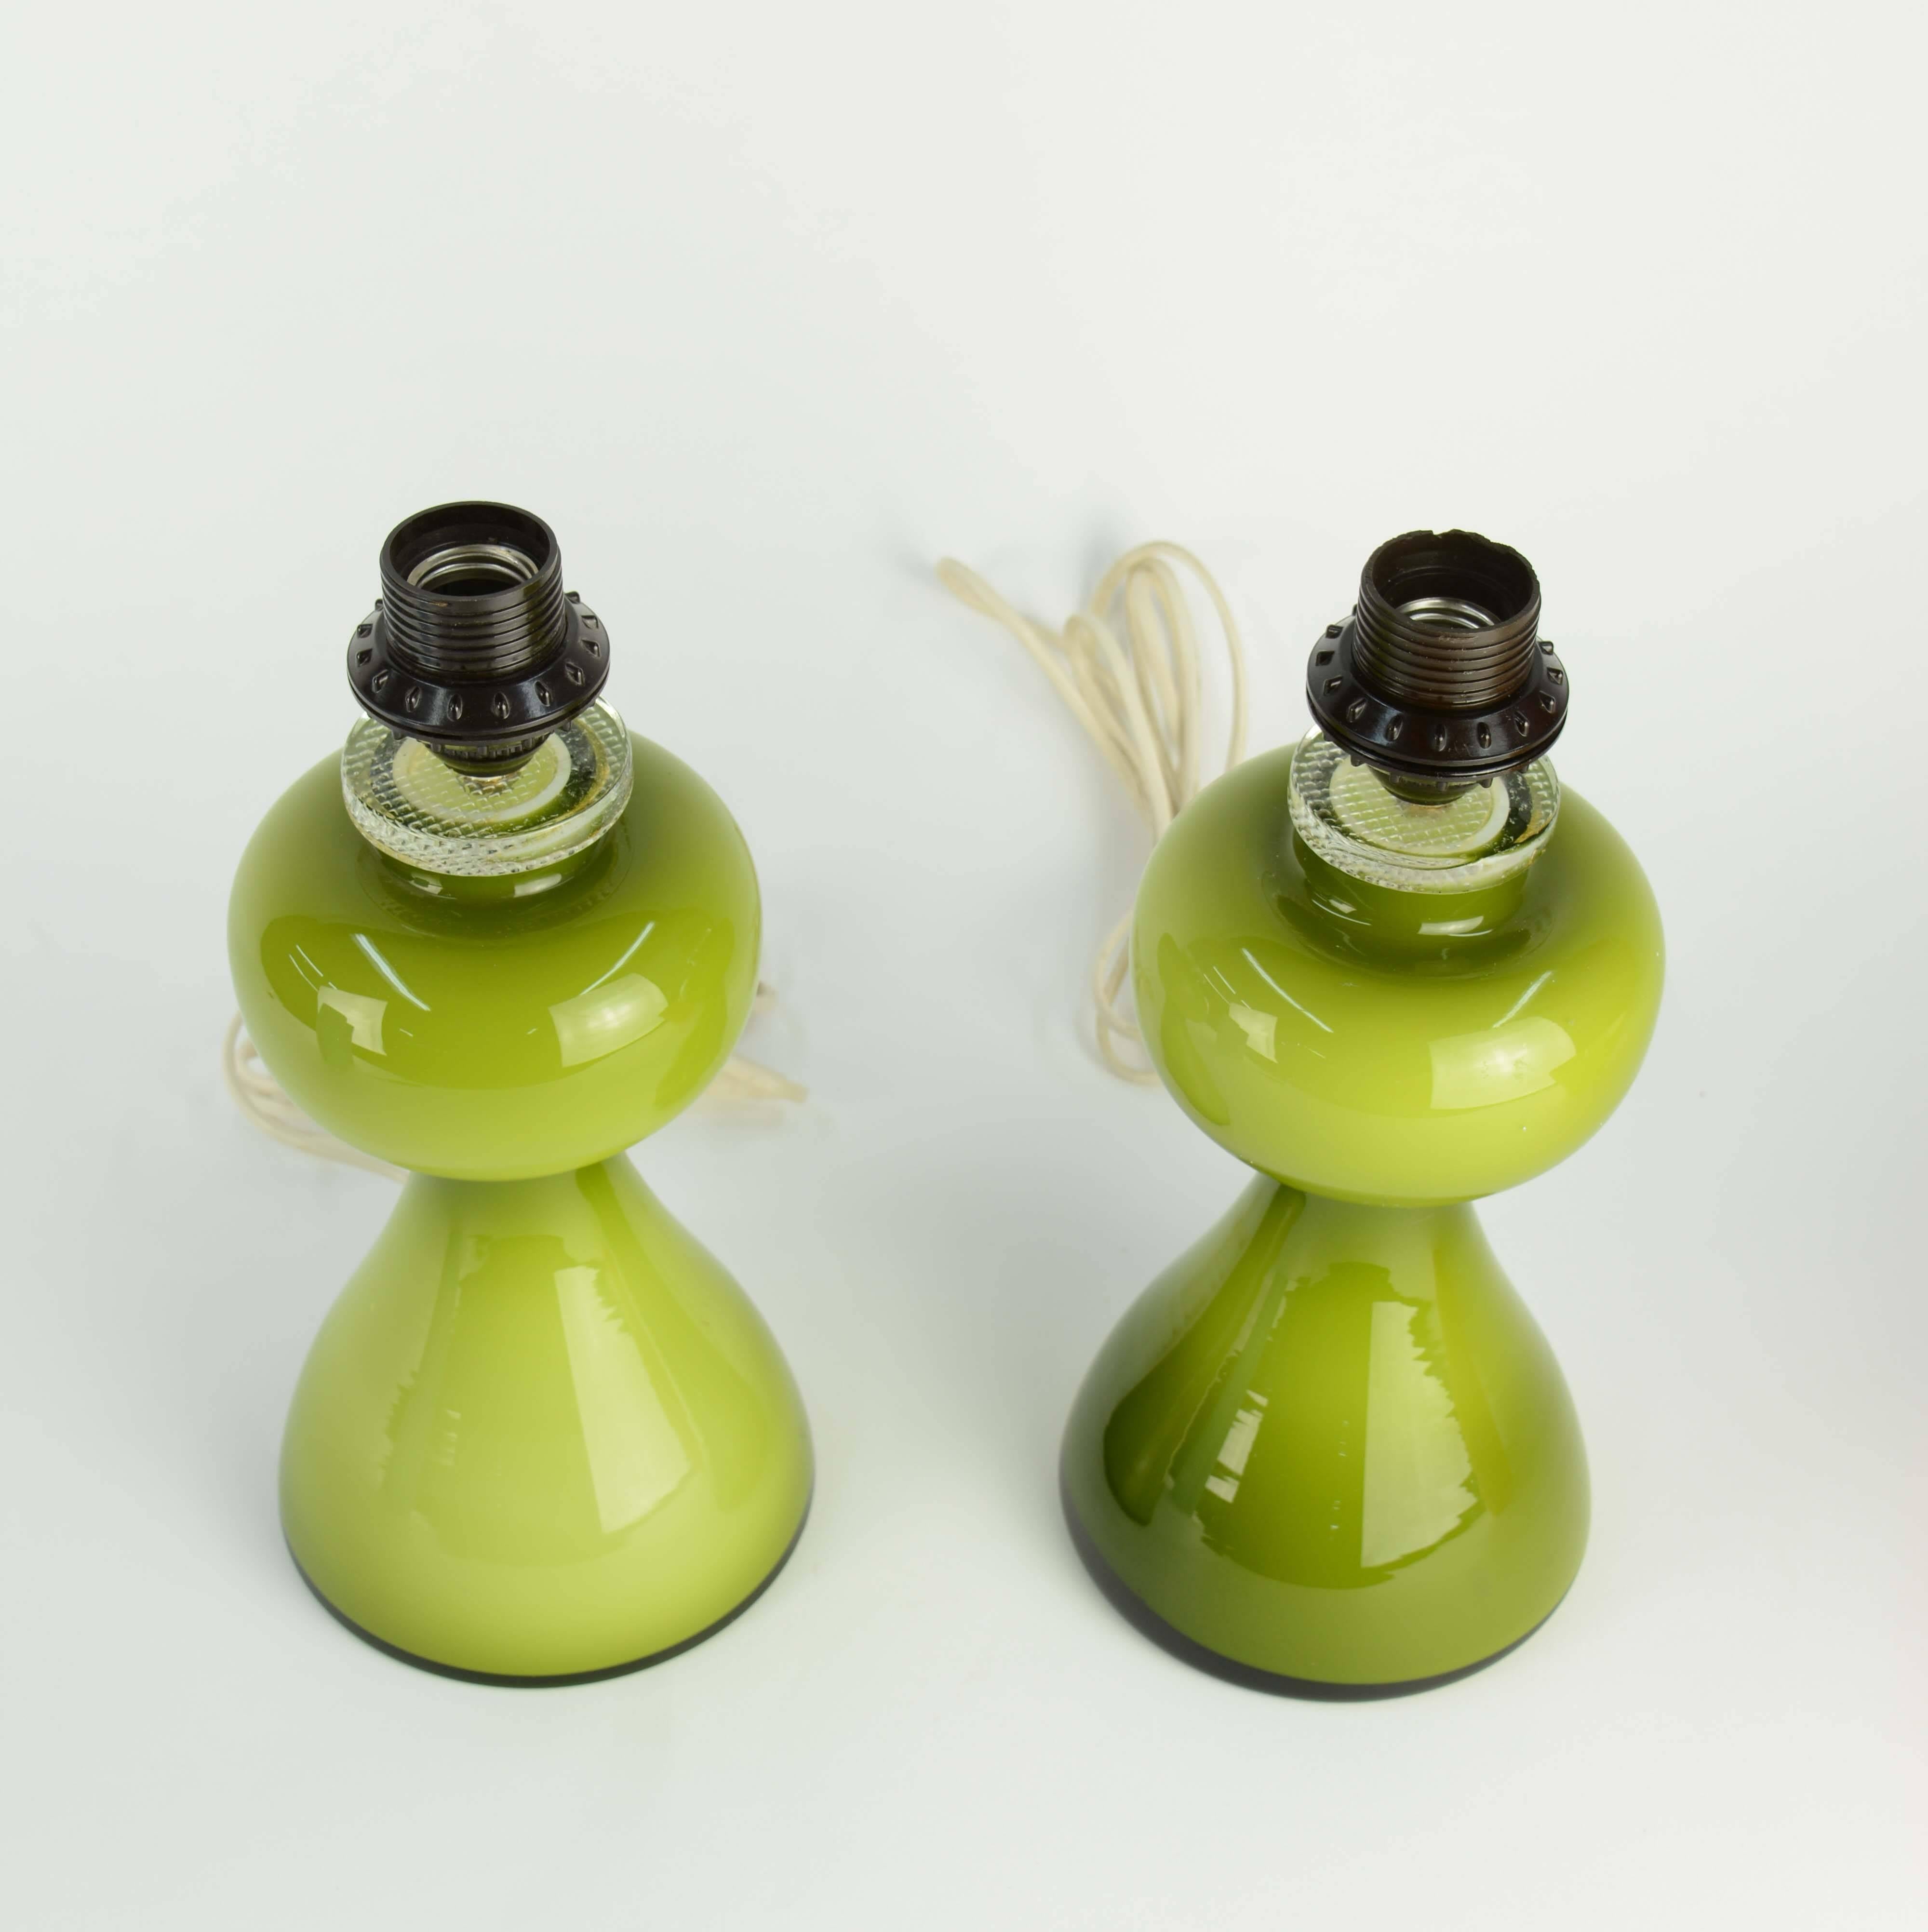 A handsome and striking pair of green glass lamps by Per-Olof Strom for Alsterfors. The lamps are crowned by clear glass collars. A wonderful example of refined Swedish glass work.